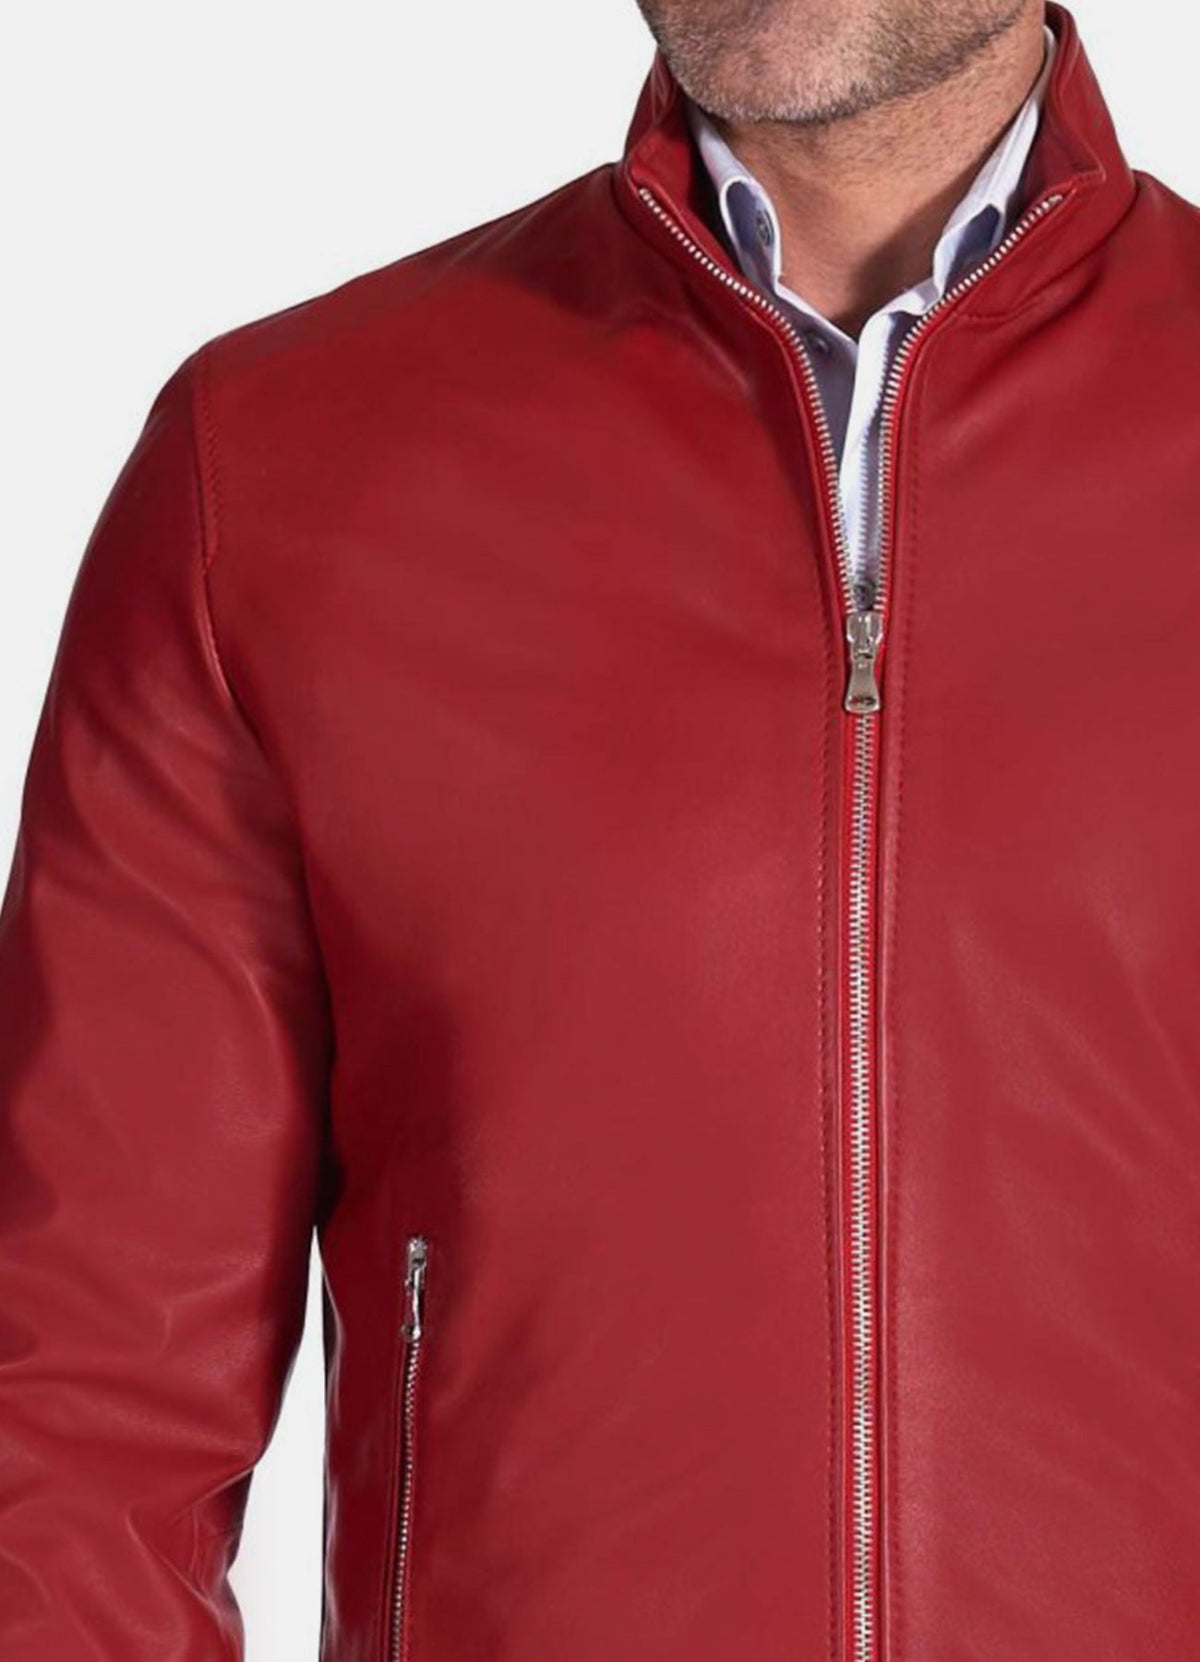 Mens Authentic Red Bomber Leather Jacket